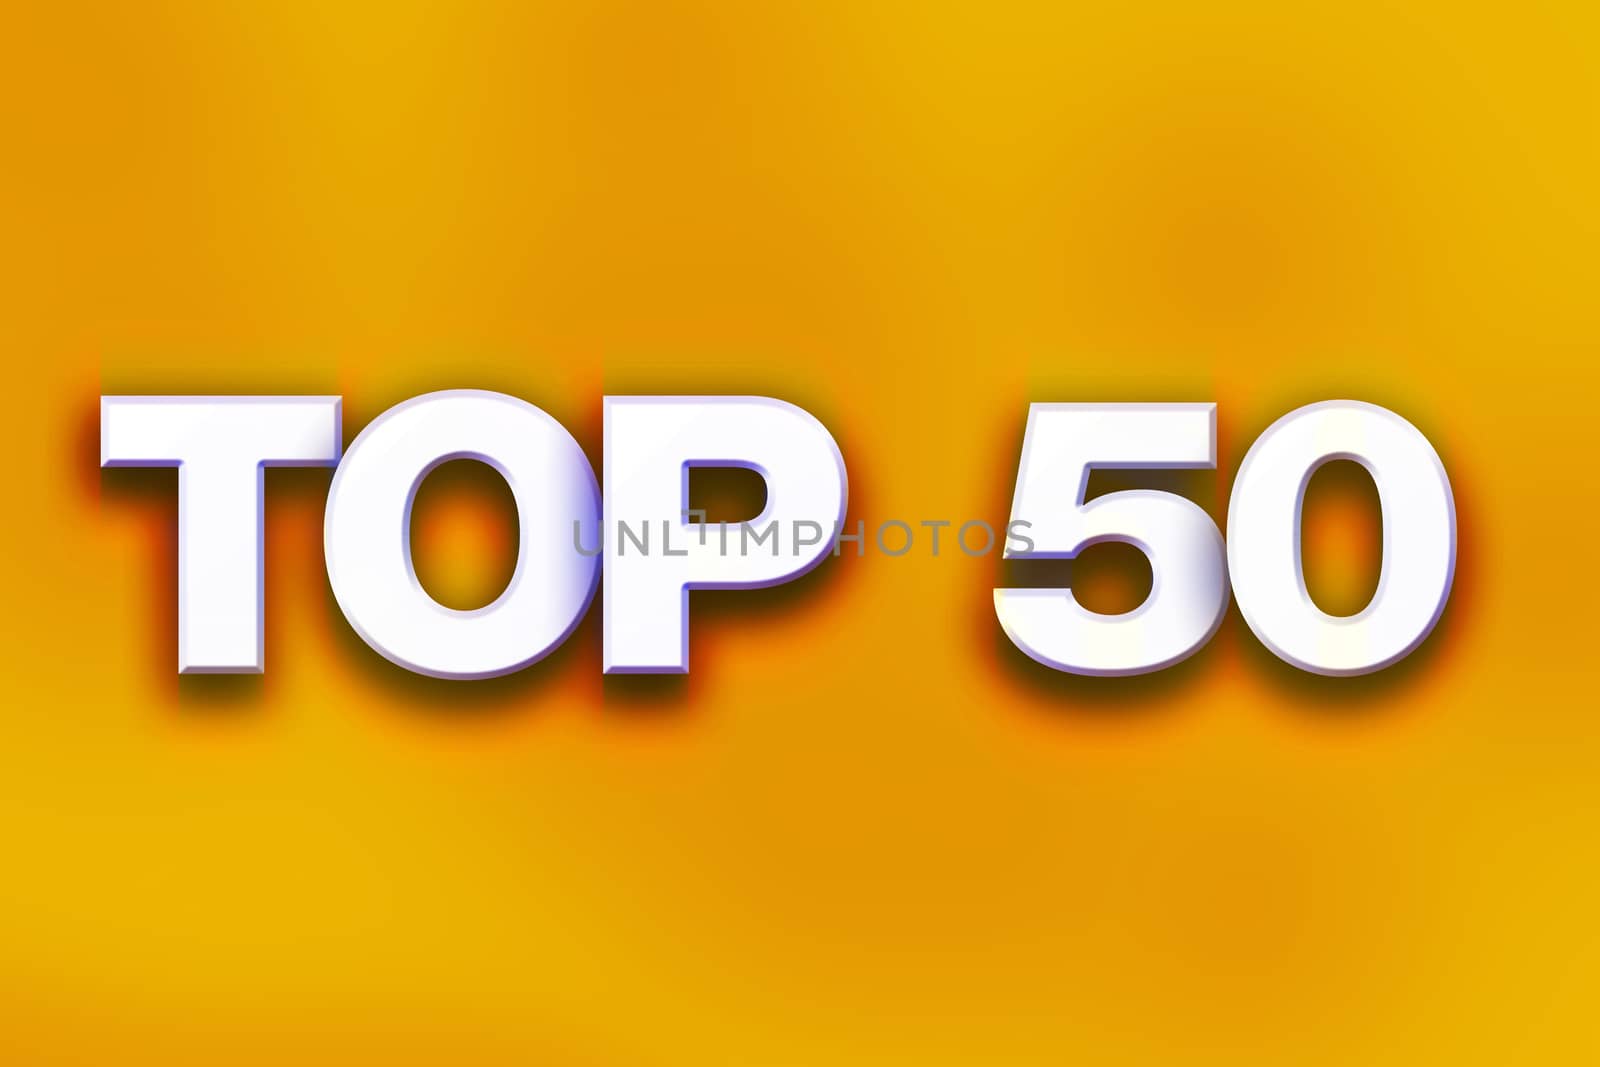 The word "Top 50" written in white 3D letters on a colorful background concept and theme.